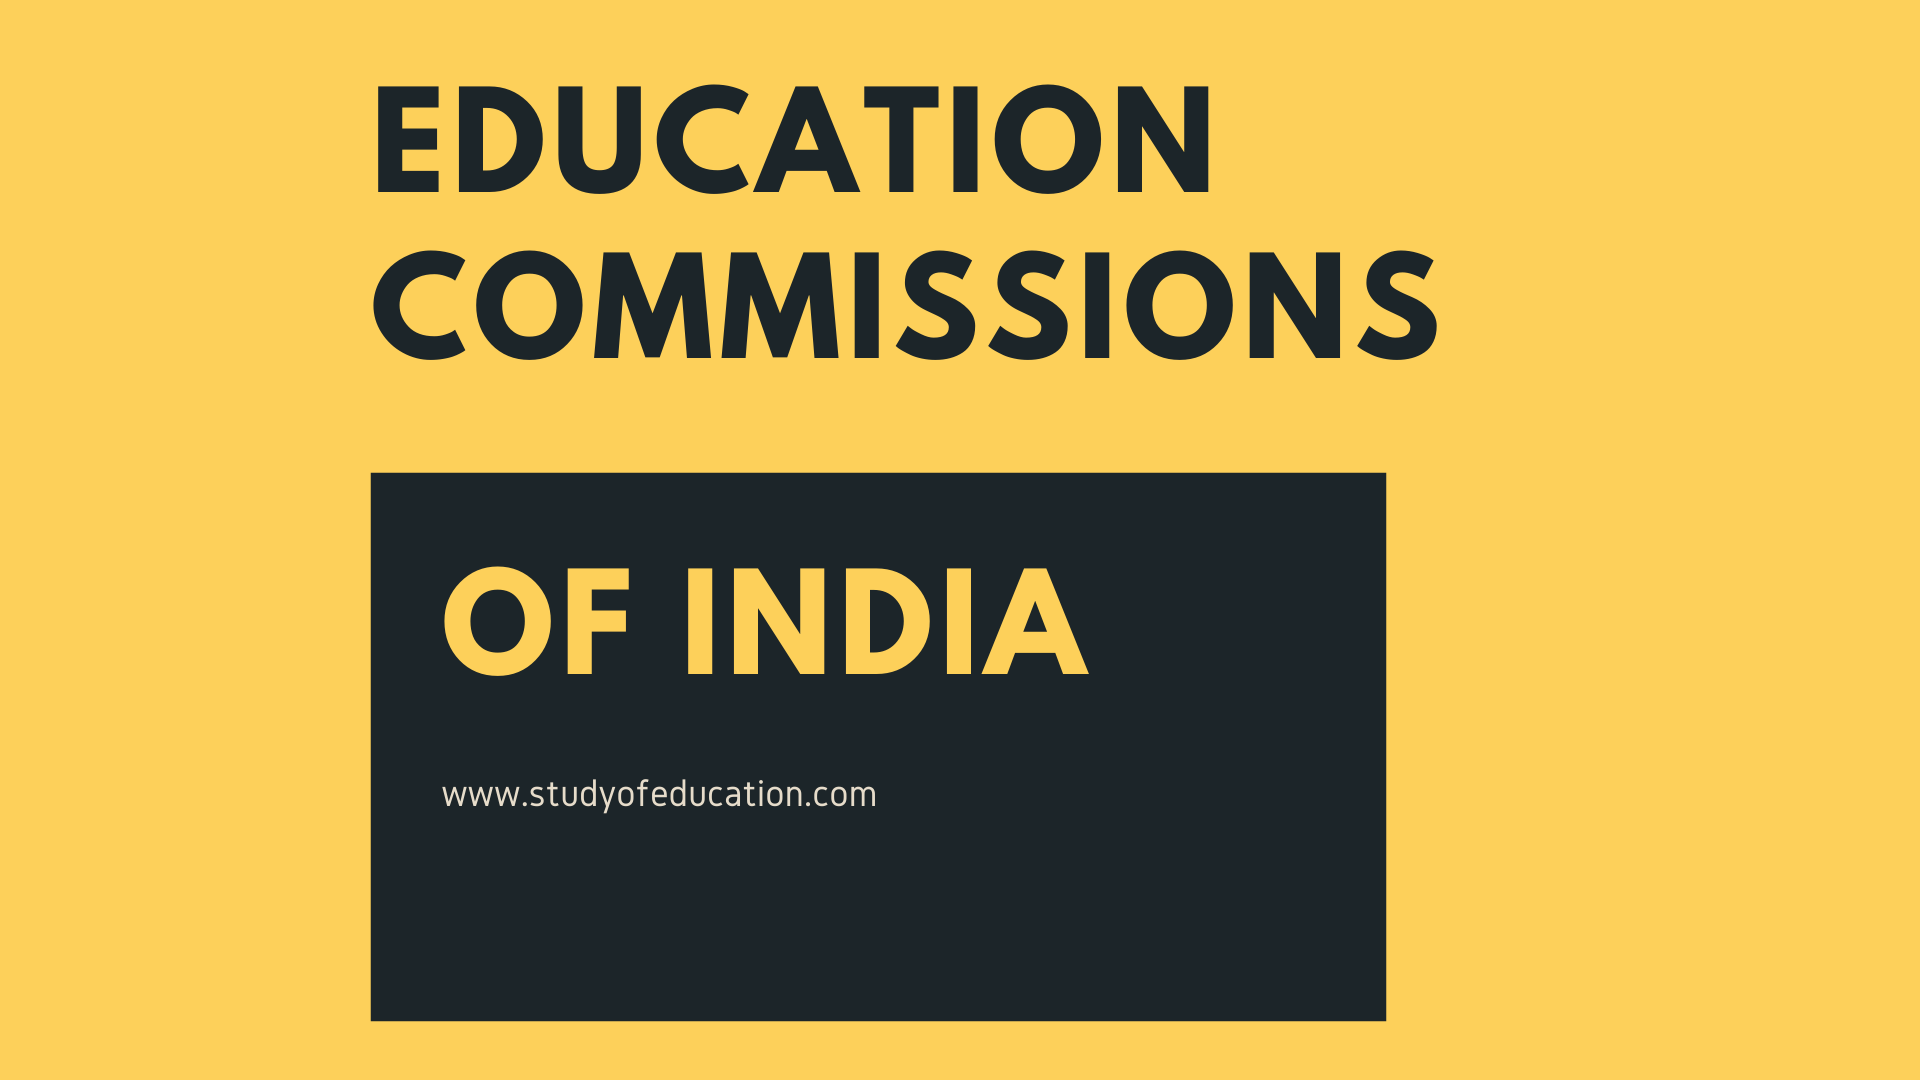 commission on education report